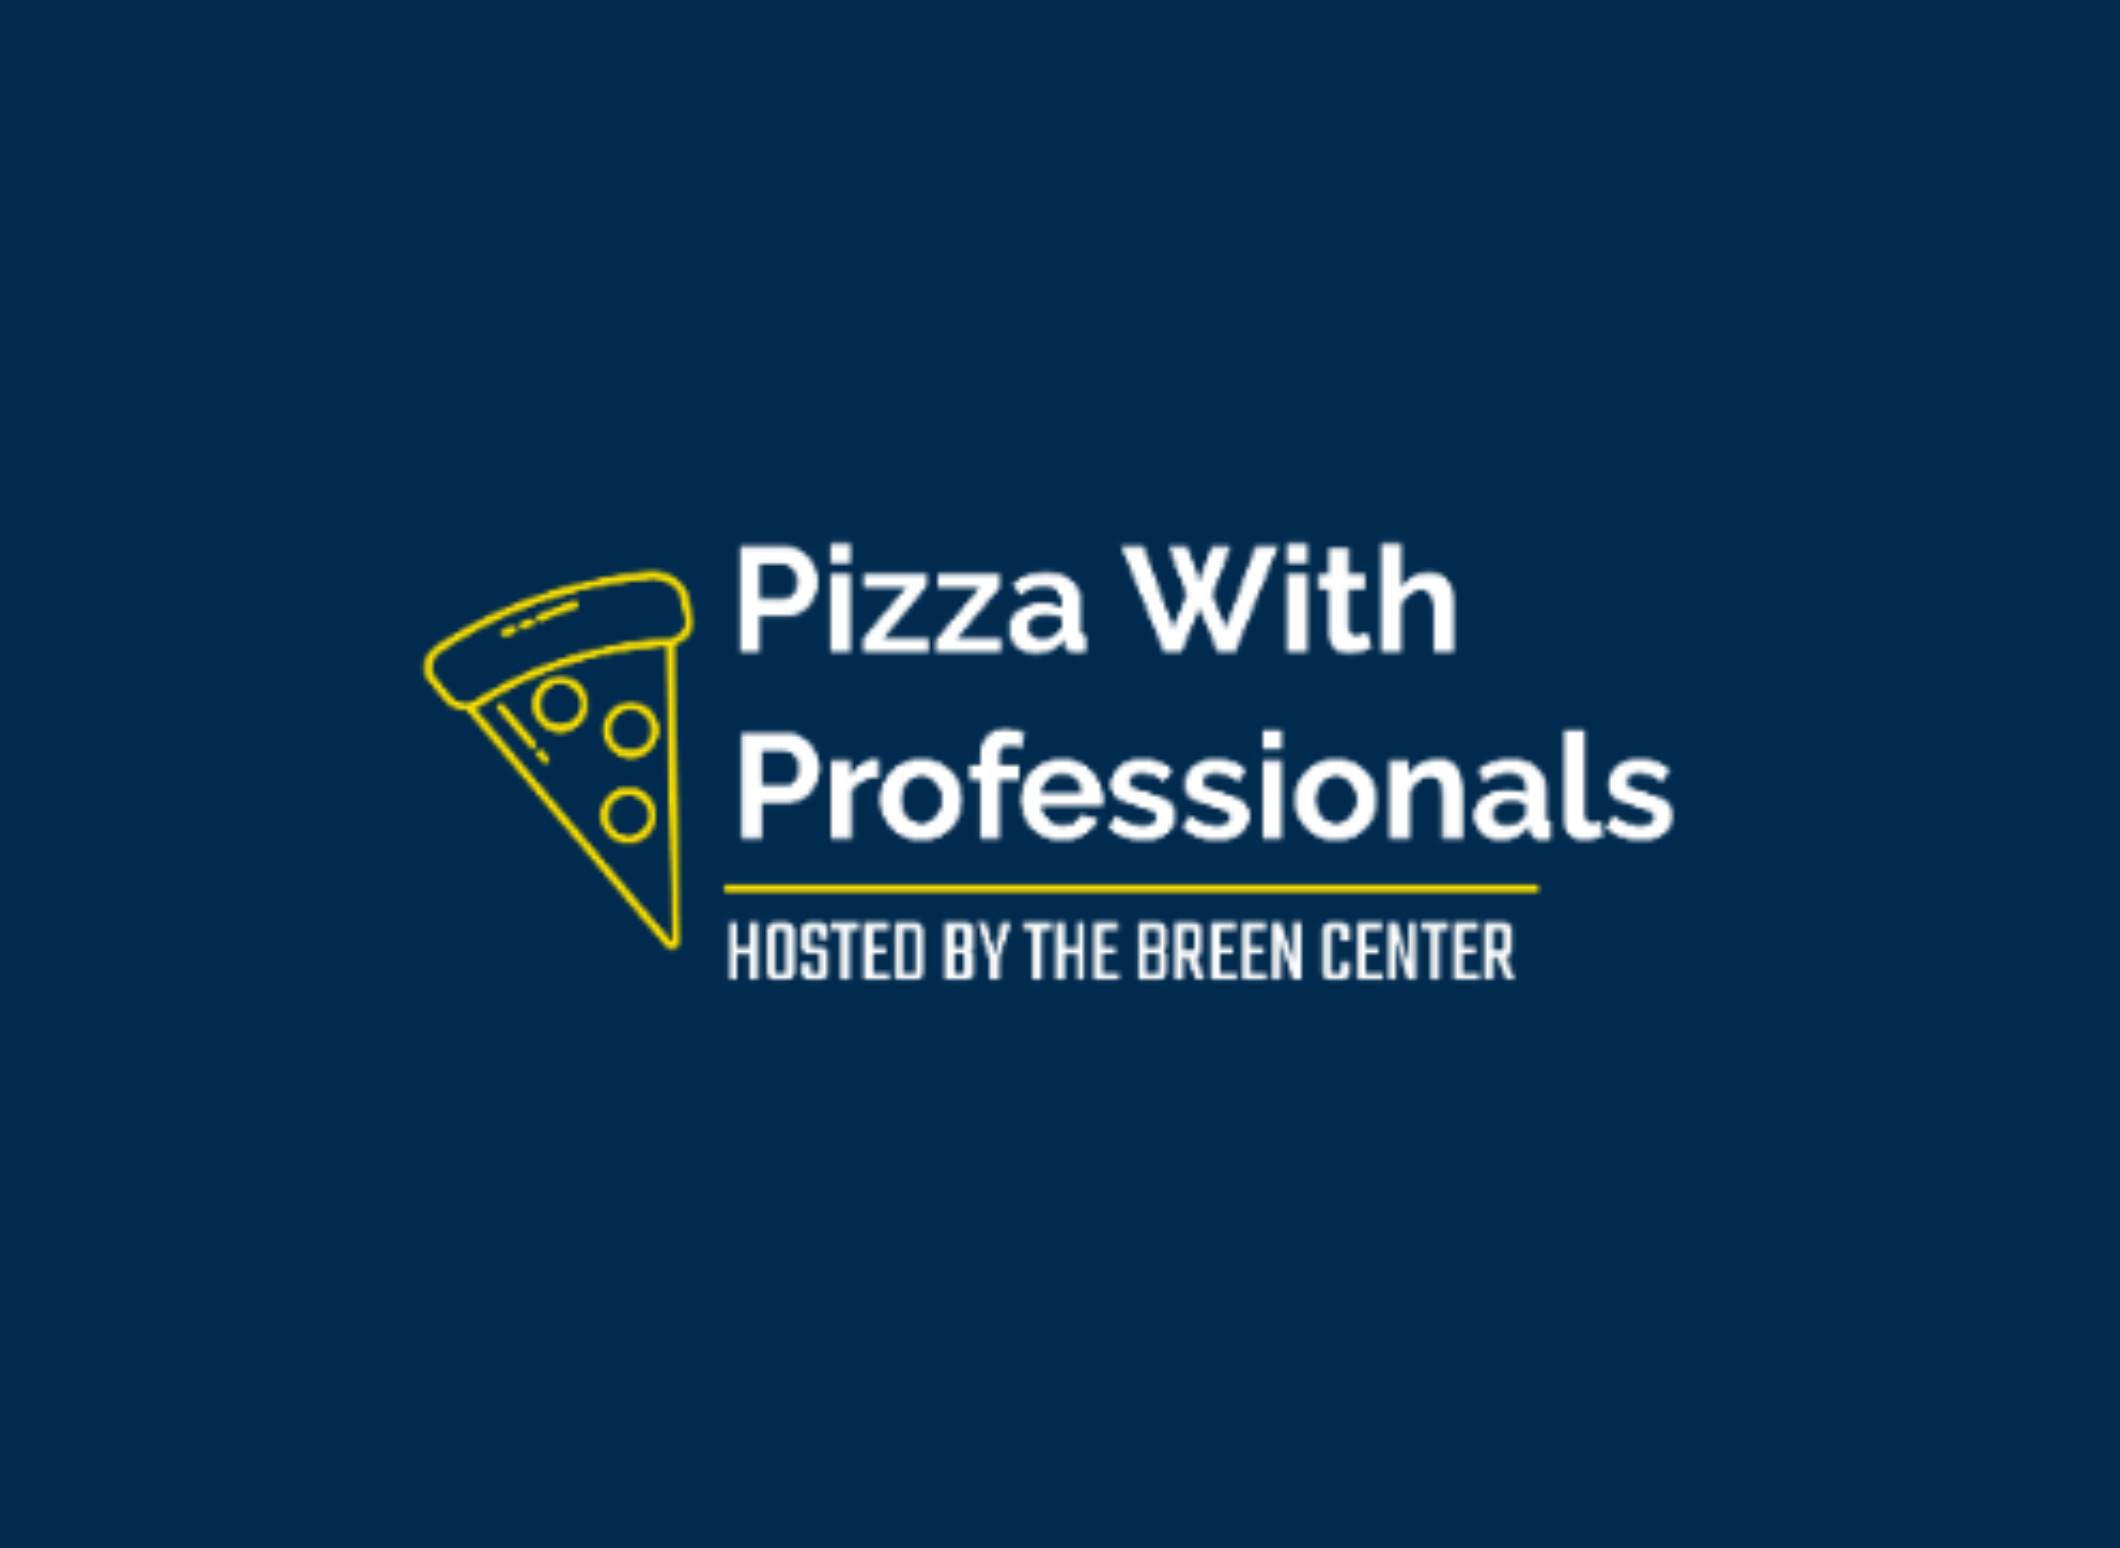 Breen Center Pizza with Professionals event graphic